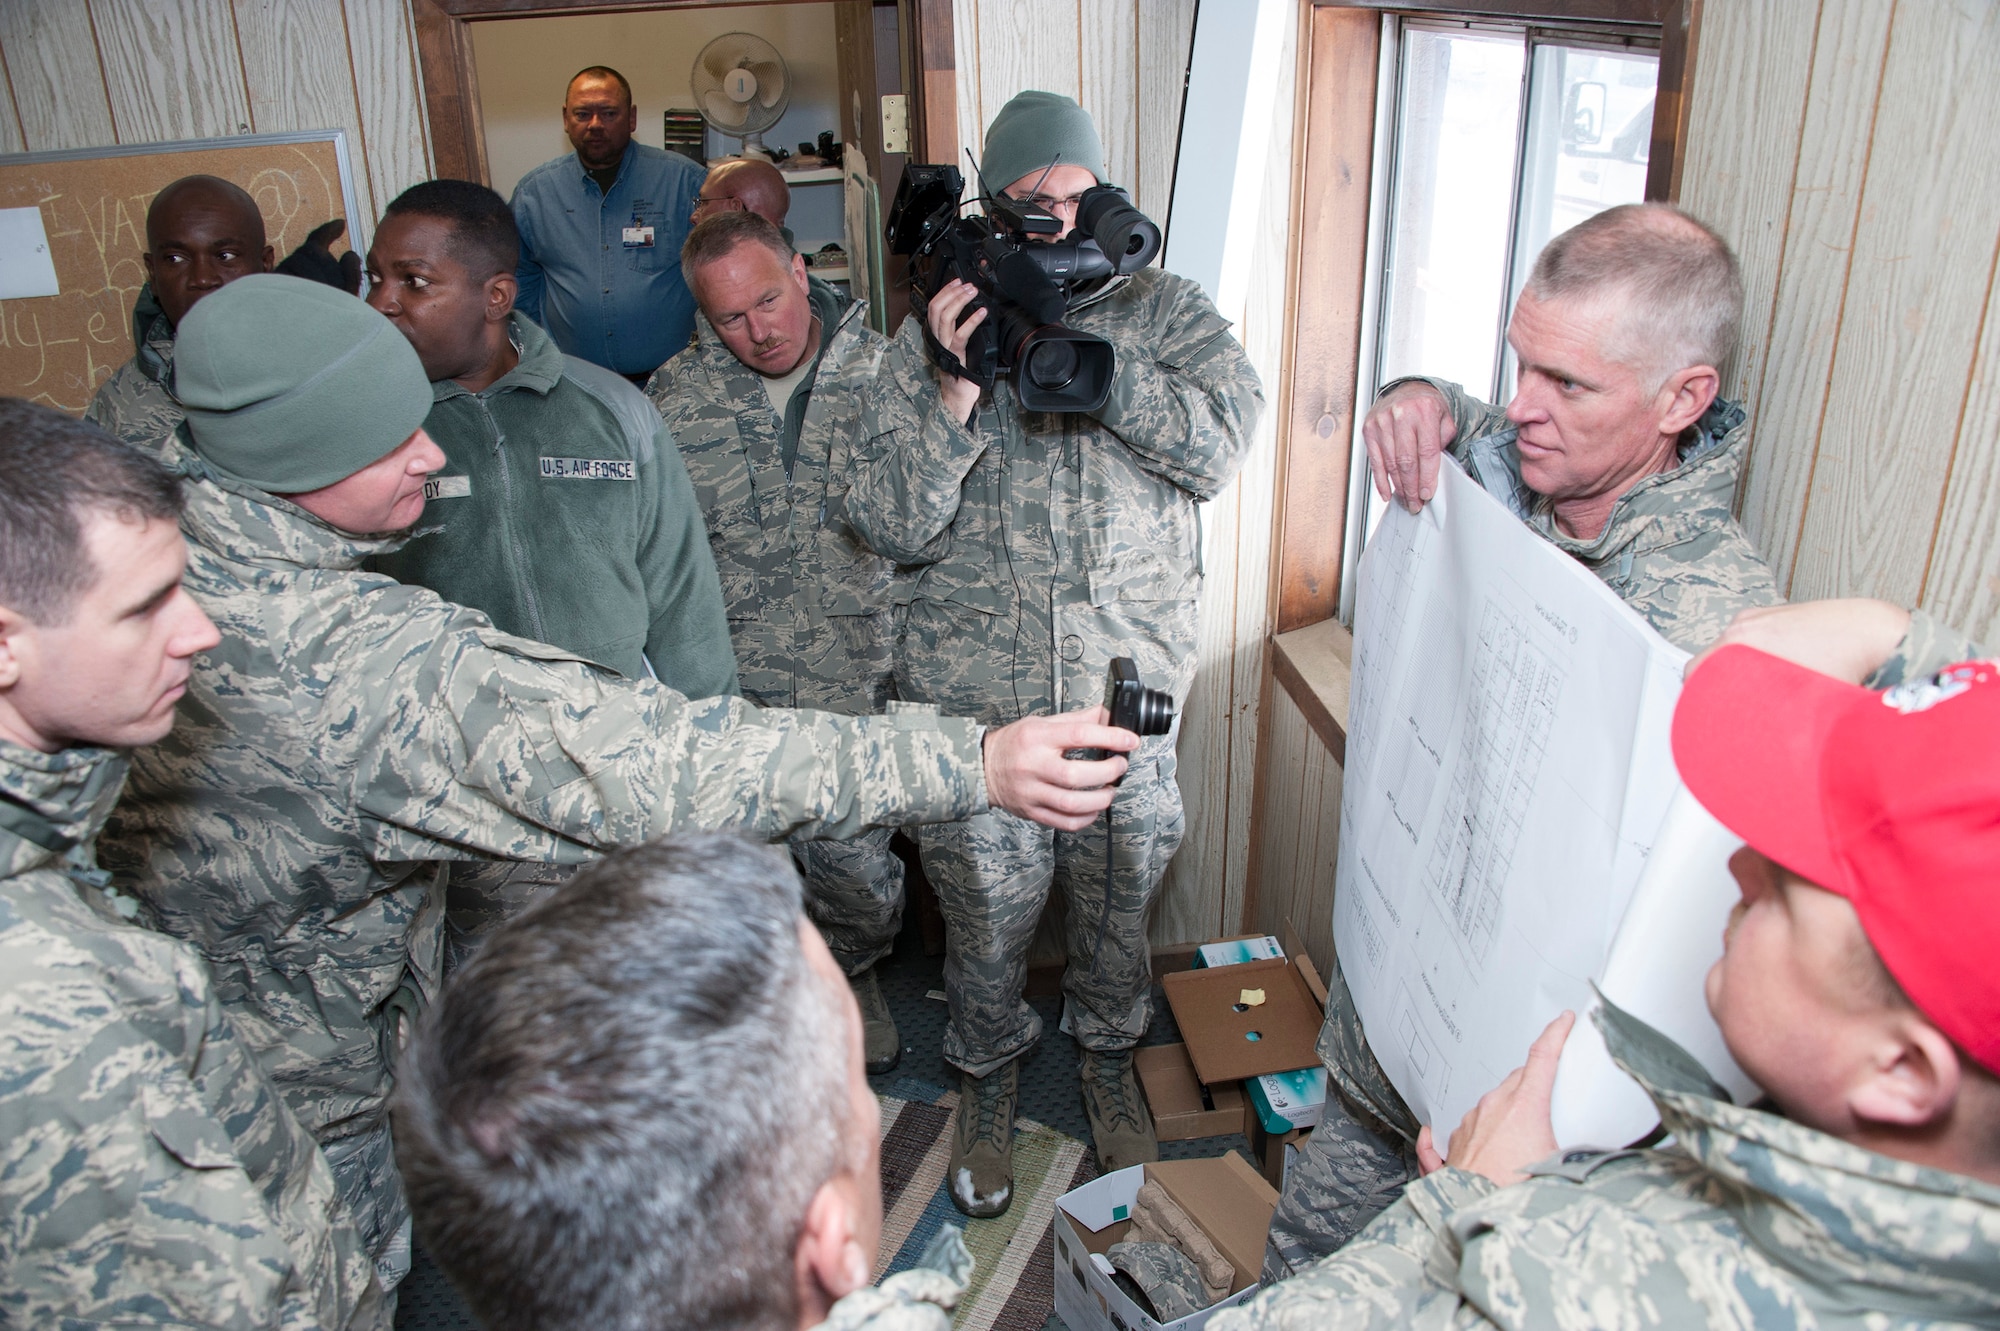 Lt. Col. Thomas Niichel holds blueprints of a dorm project for members from the Air National Guard as they perform a site survey at Snow Mountain Ranch, near Winter Park, Colo., in preparation for a renovation project that will take place this summer.  Civil Engineers will be rotating in and out throughout the summer from places such as Oklahoma City, Houston, Saint Croix, U.S. Virgin Islands, and St. Josephs, MO.  Project Sanctuary is a program that currently provides therapeutic, recreational retreats to military families to help reduce the negative effects of deployment. The CE effort will vastly improve and properly equip dorms for military members during their stay.  (U.S. Air National Guard photo by Senior Master Sgt. John Rohrer)